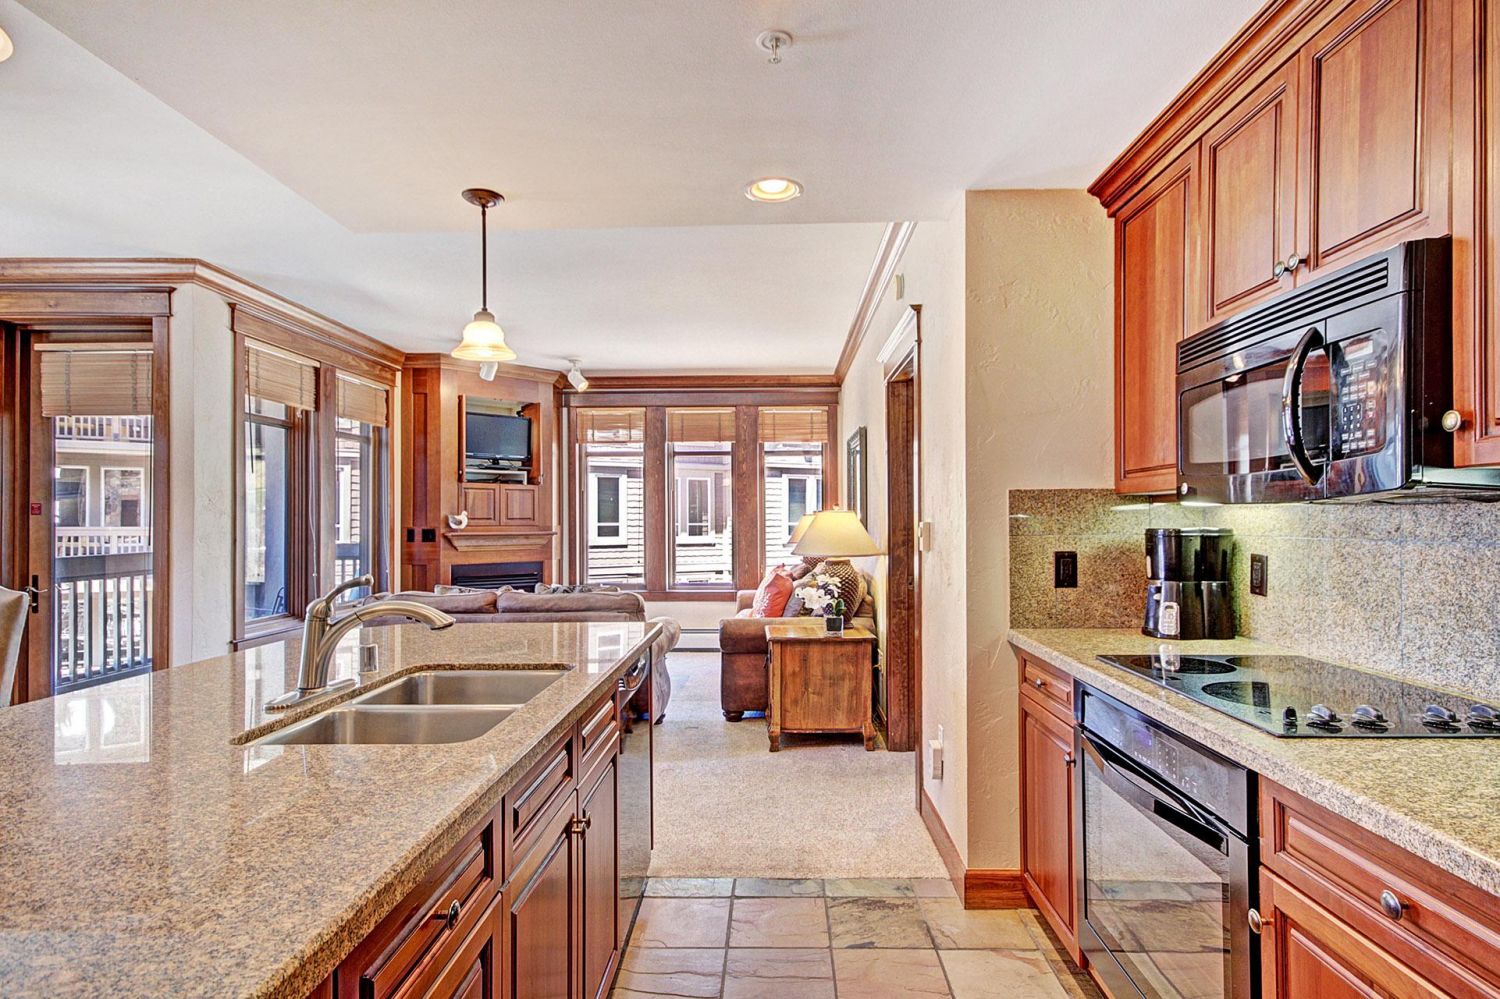 Beautiful Fully Equipped Kitchen - Granite Counters and Appliances